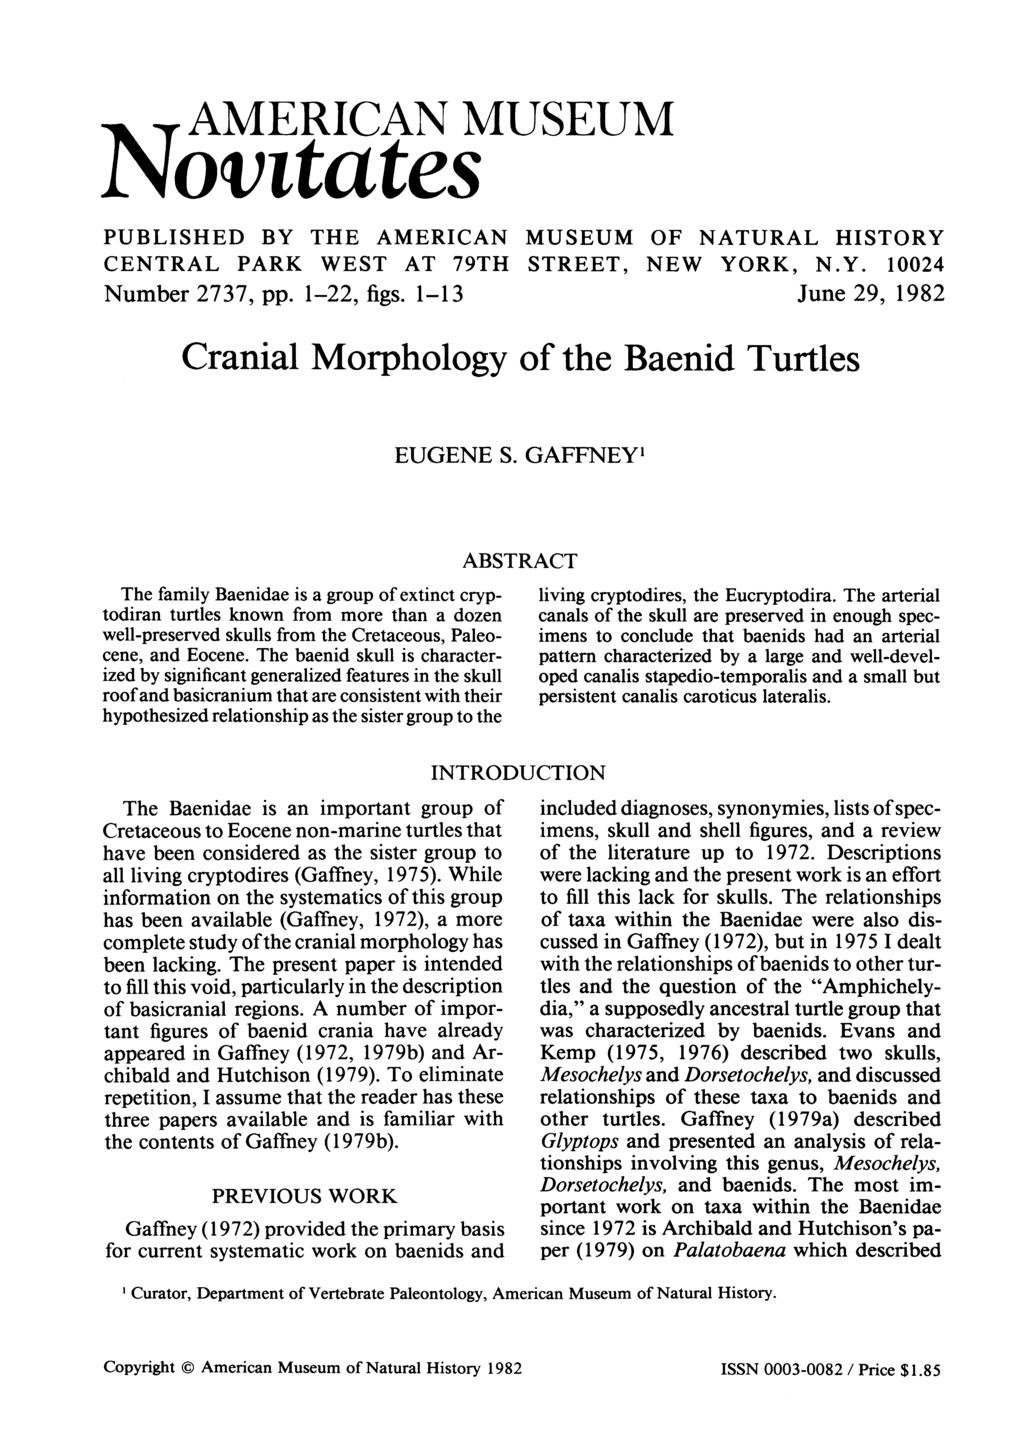 AMERICAN MUSEUM Norntates PUBLISHED BY THE AMERICAN MUSEUM CENTRAL PARK WEST AT 79TH STREET, Number 2737, pp. 1-22, figs. 1-1 3 OF NATURAL HISTORY NEW YORK, N.Y. 10024 June 29, 1982 Cranial Morphology of the Baenid Turtles EUGENE S.